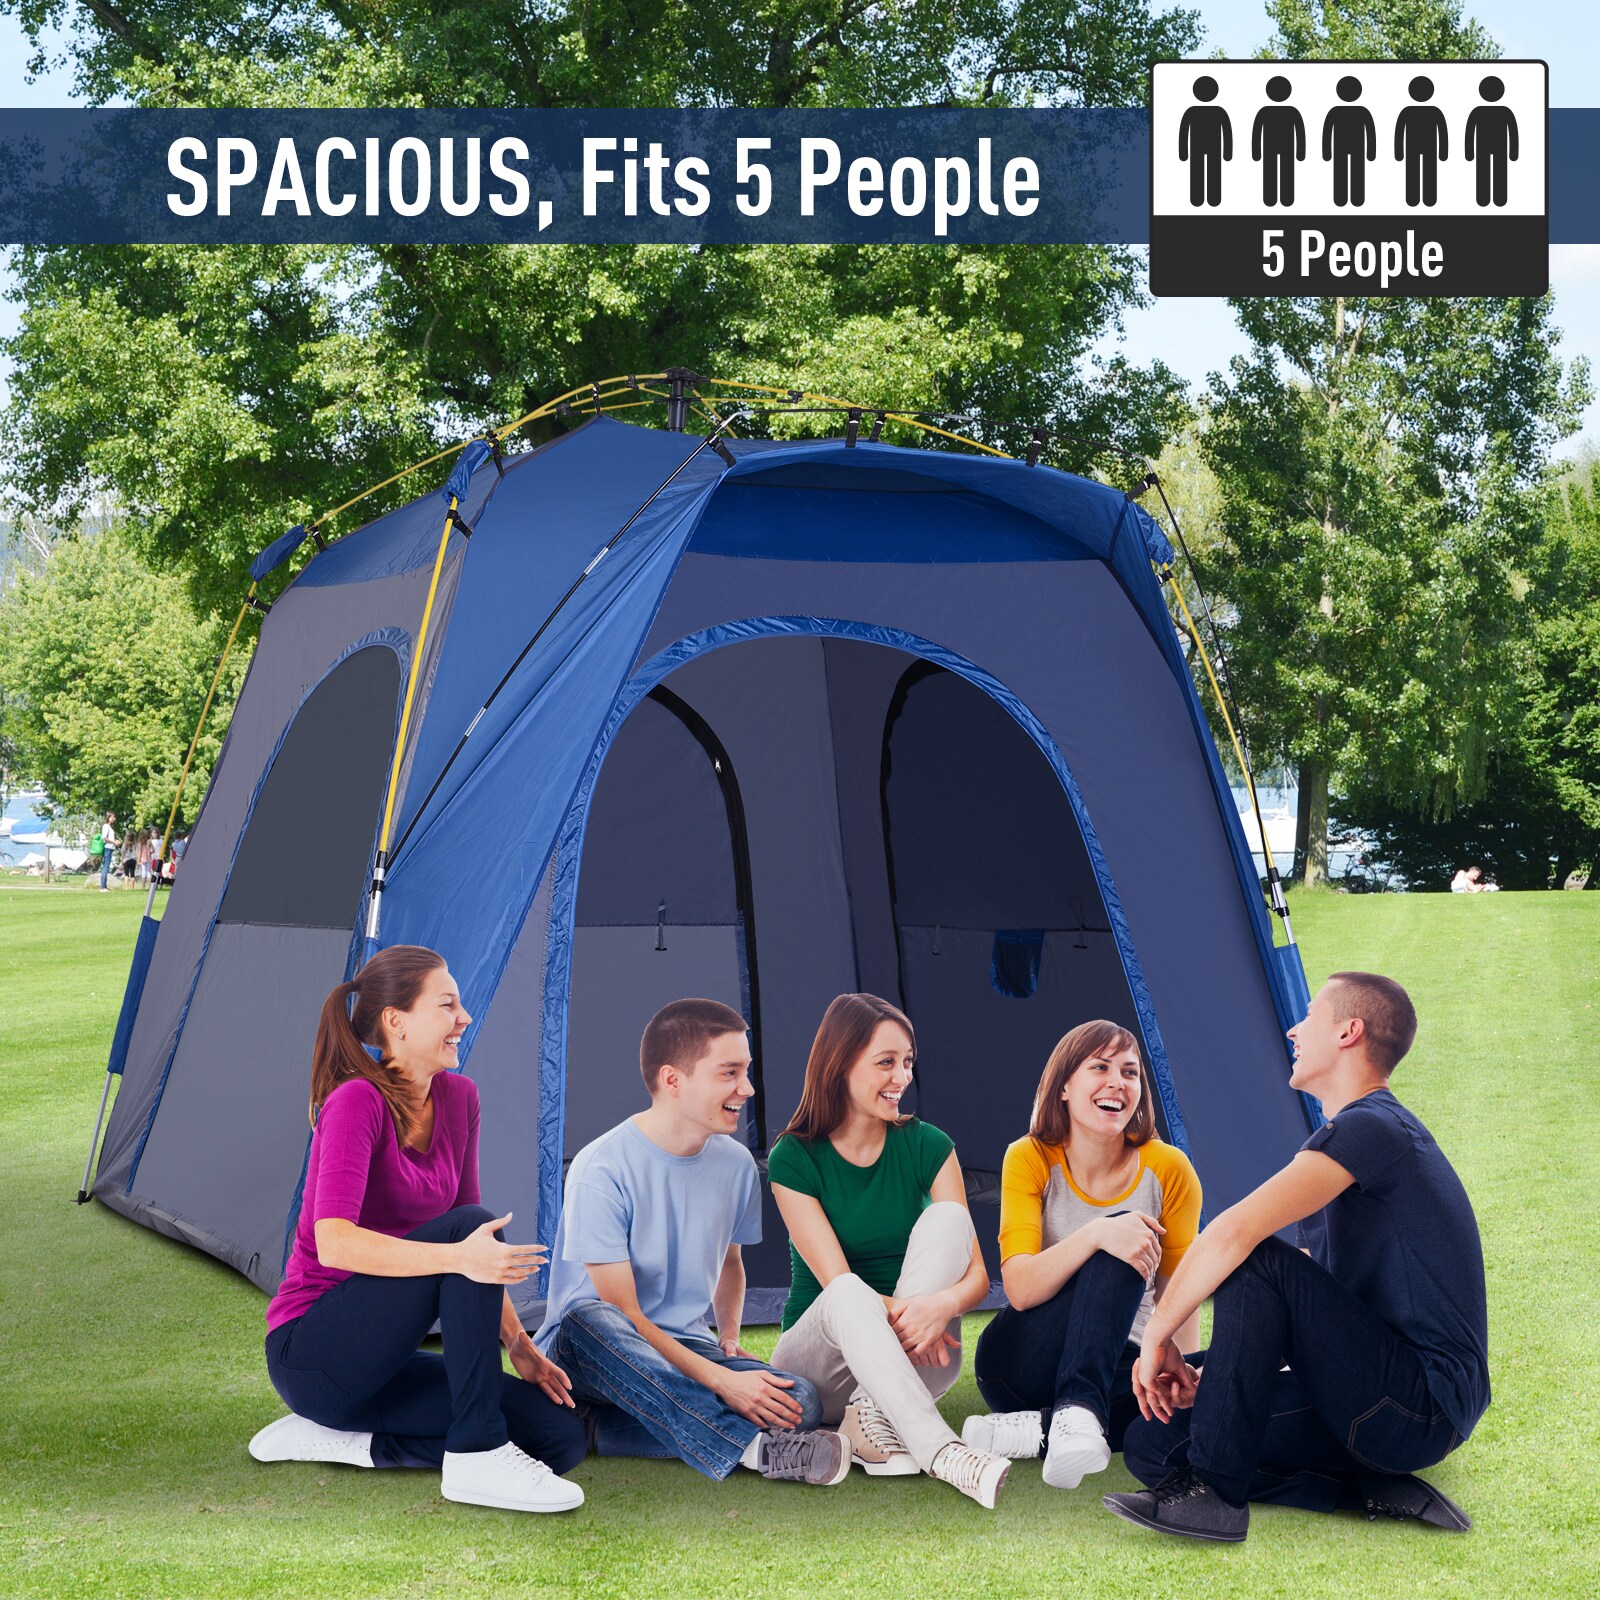 Outsunny Three Man Pop Up Tent Camping Festival Hiking Family Travel Shelter